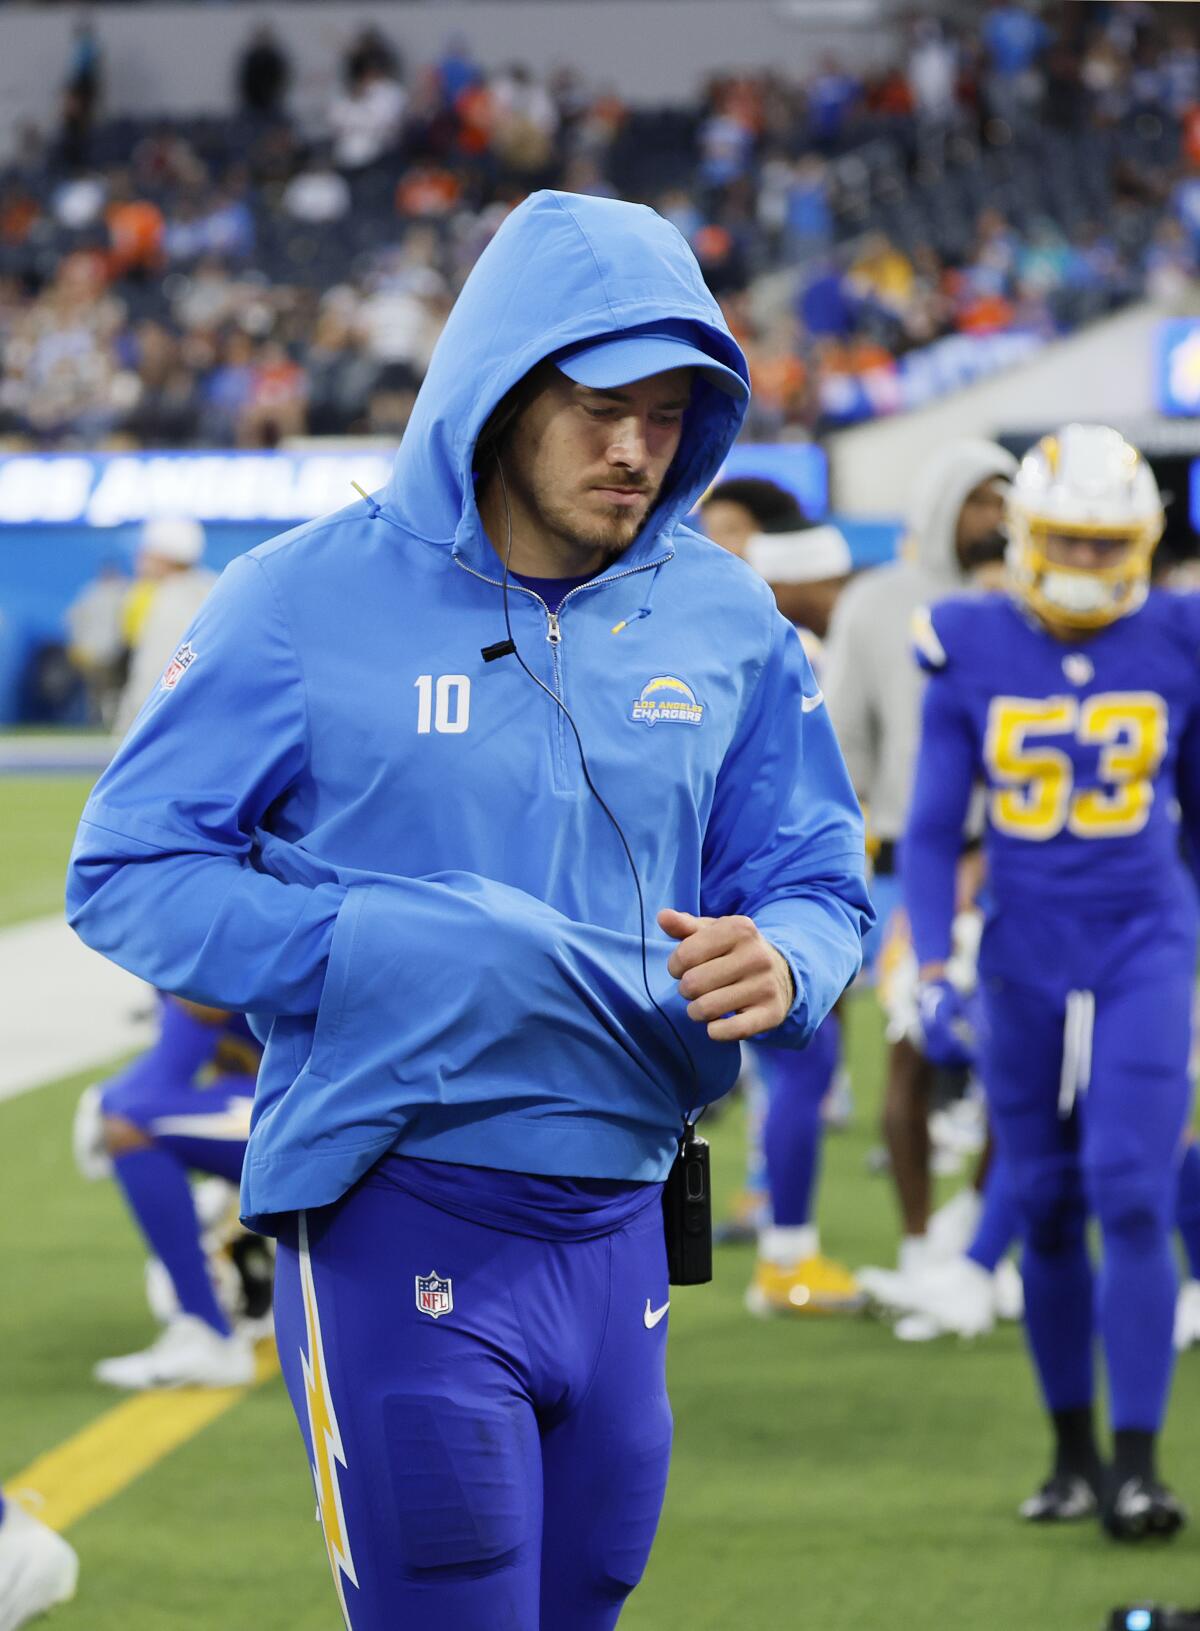 Chargers quarterback Justin Herbert walks off the field with an injured finger protected in his sweatshirt pouch.